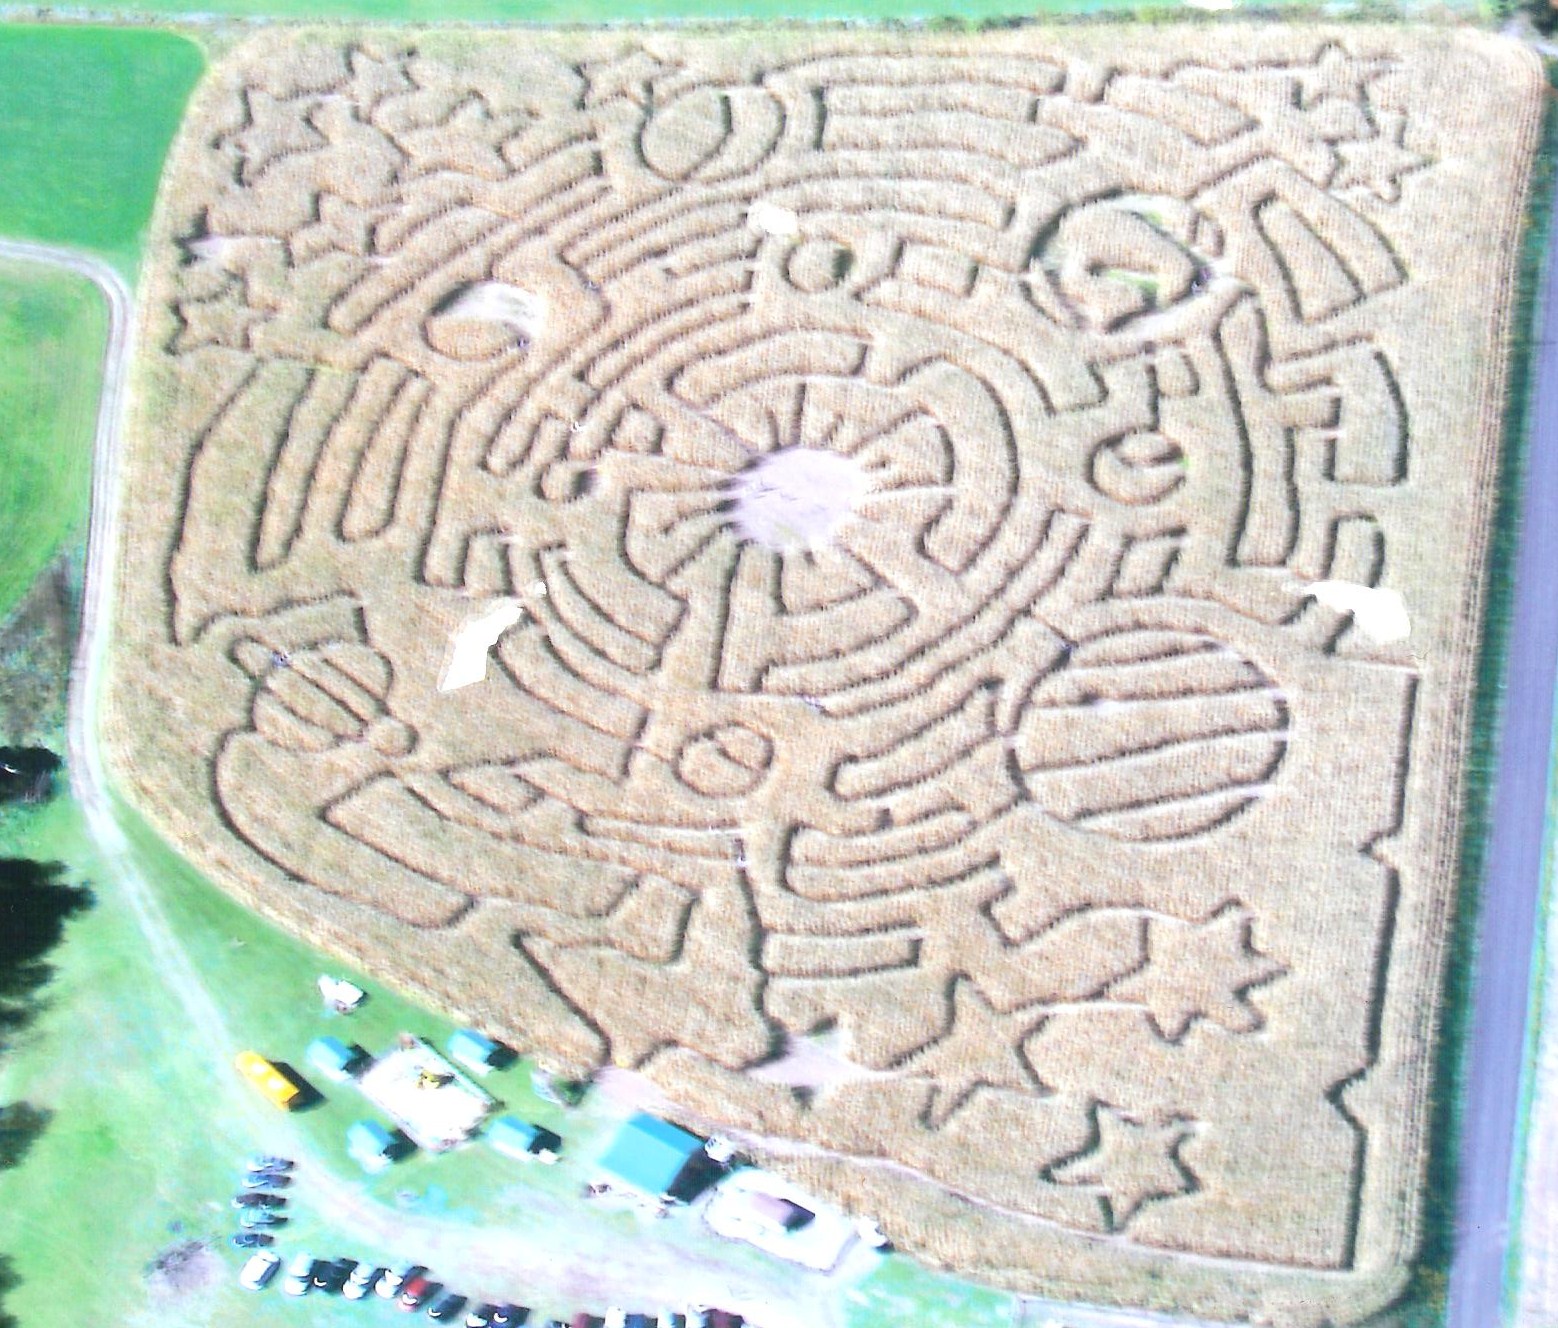 Corn maze design depicting the solar system, stars, and a maze